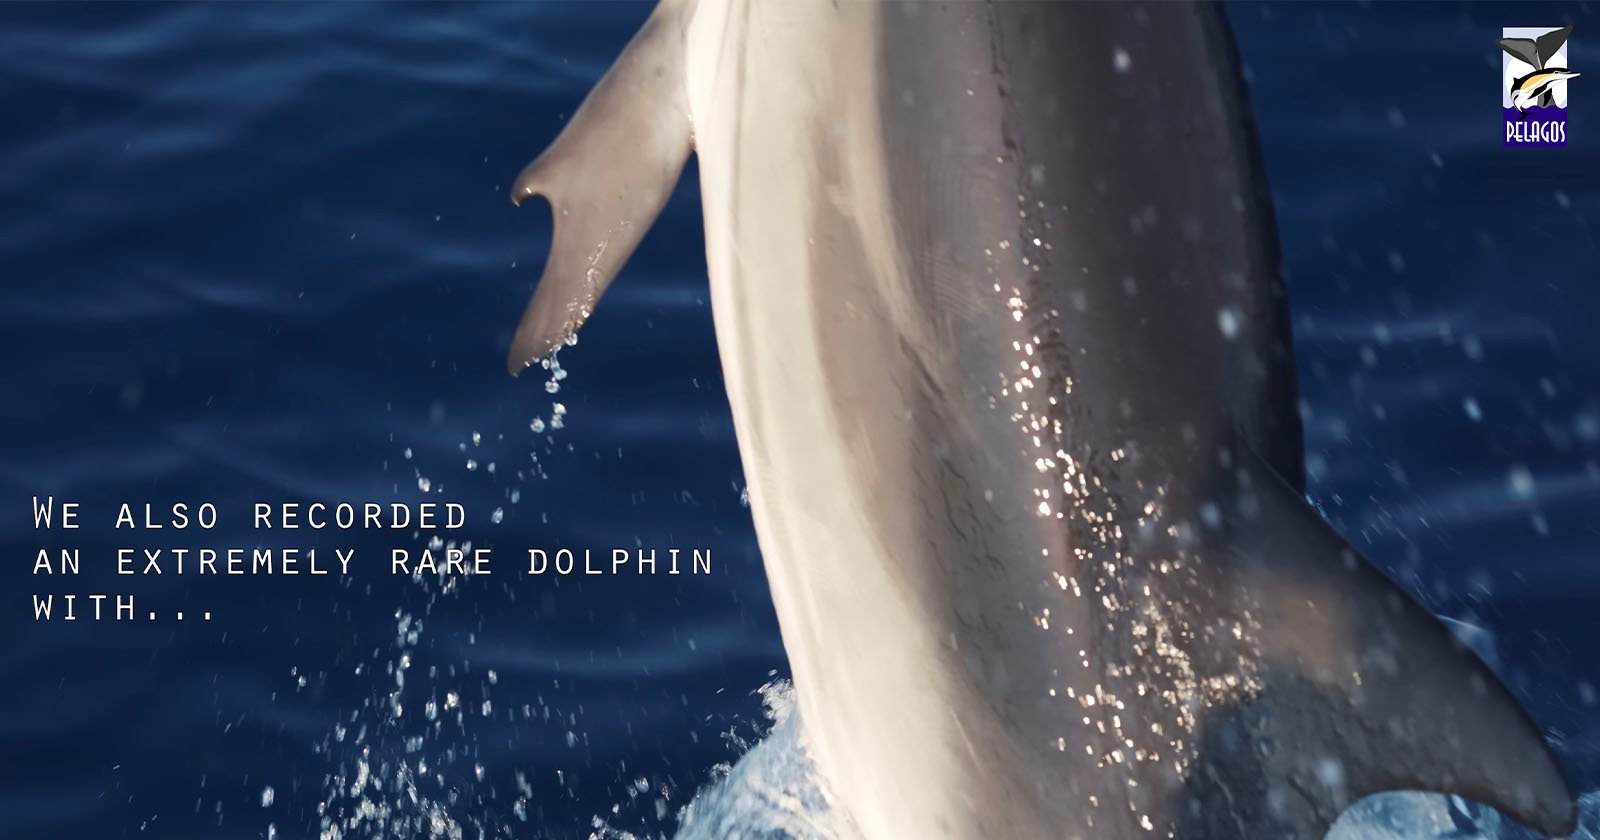 Footage Captures Extremely Rare Dolphin with ‘Thumbs’